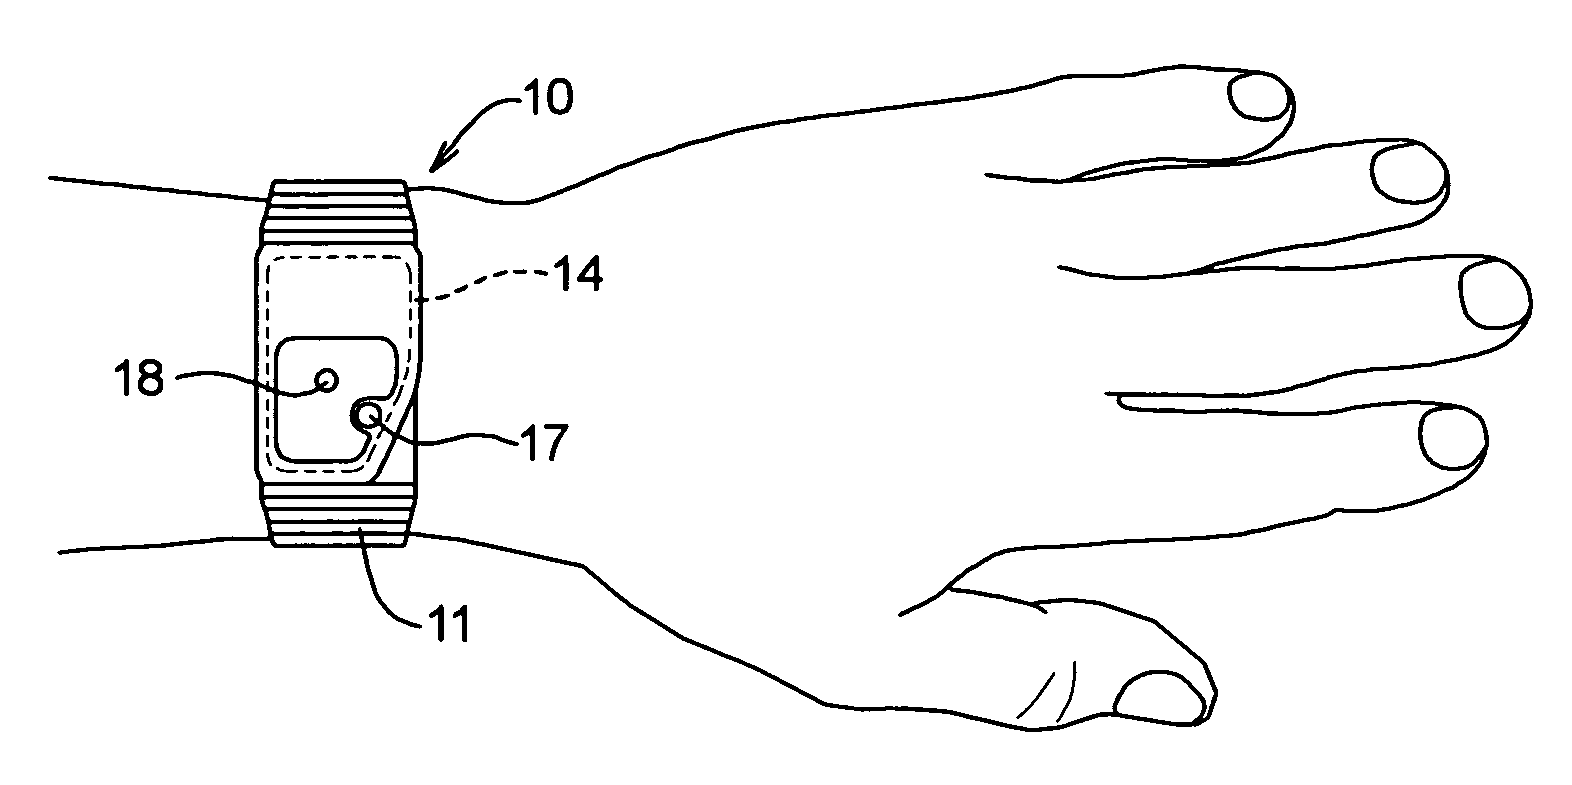 Systems and methods for detecting symptoms of hypoglycemia